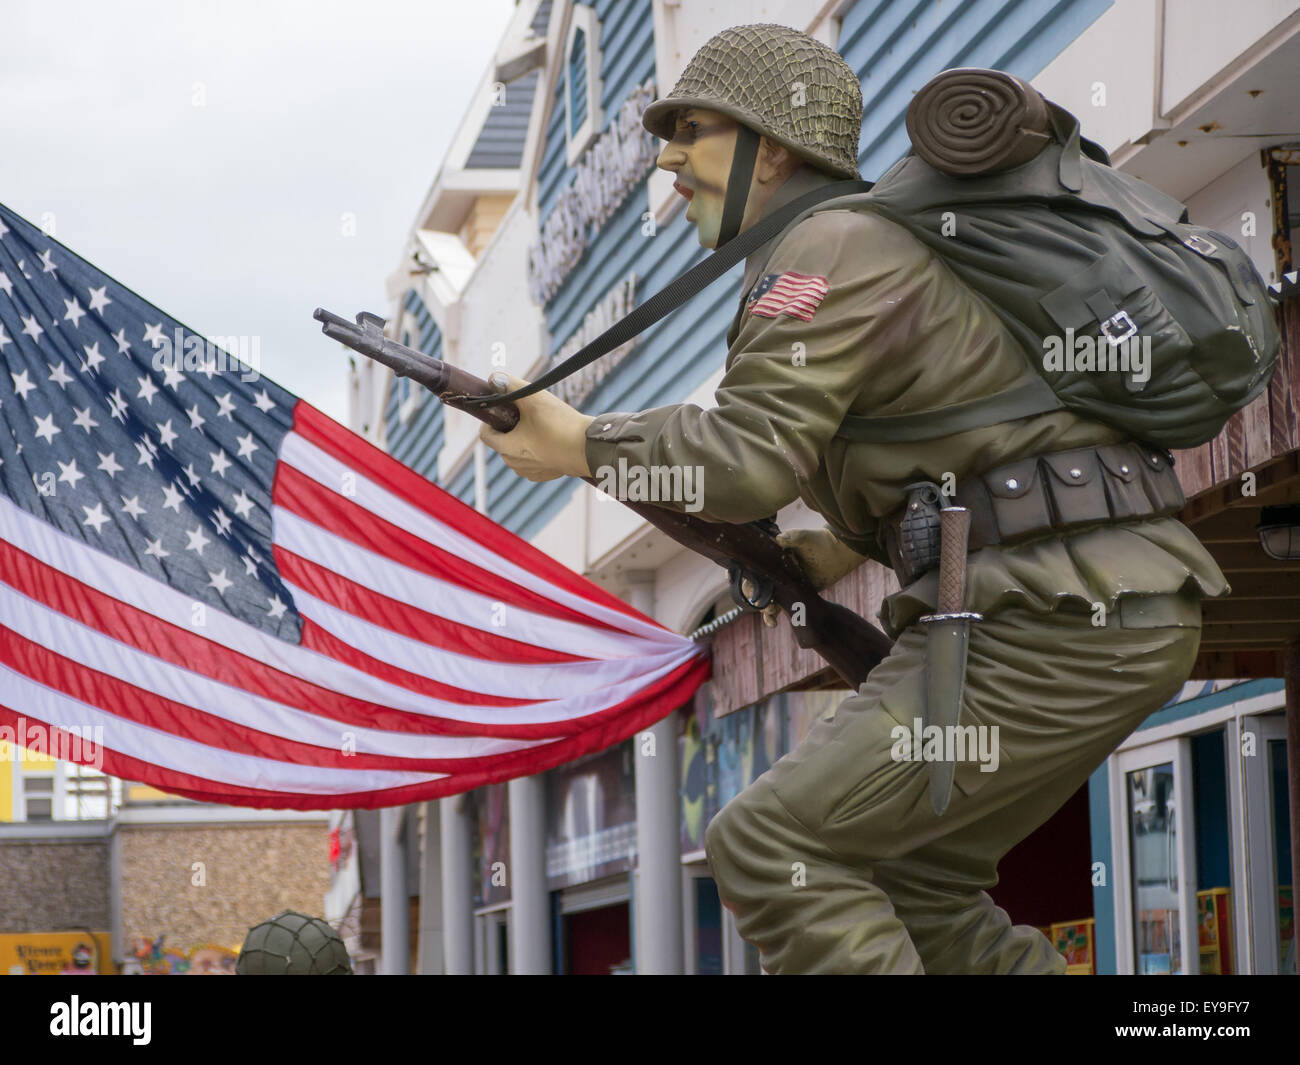 A model of a WW2 American soldier in battle uniform standing in front of an American flag Stock Photo